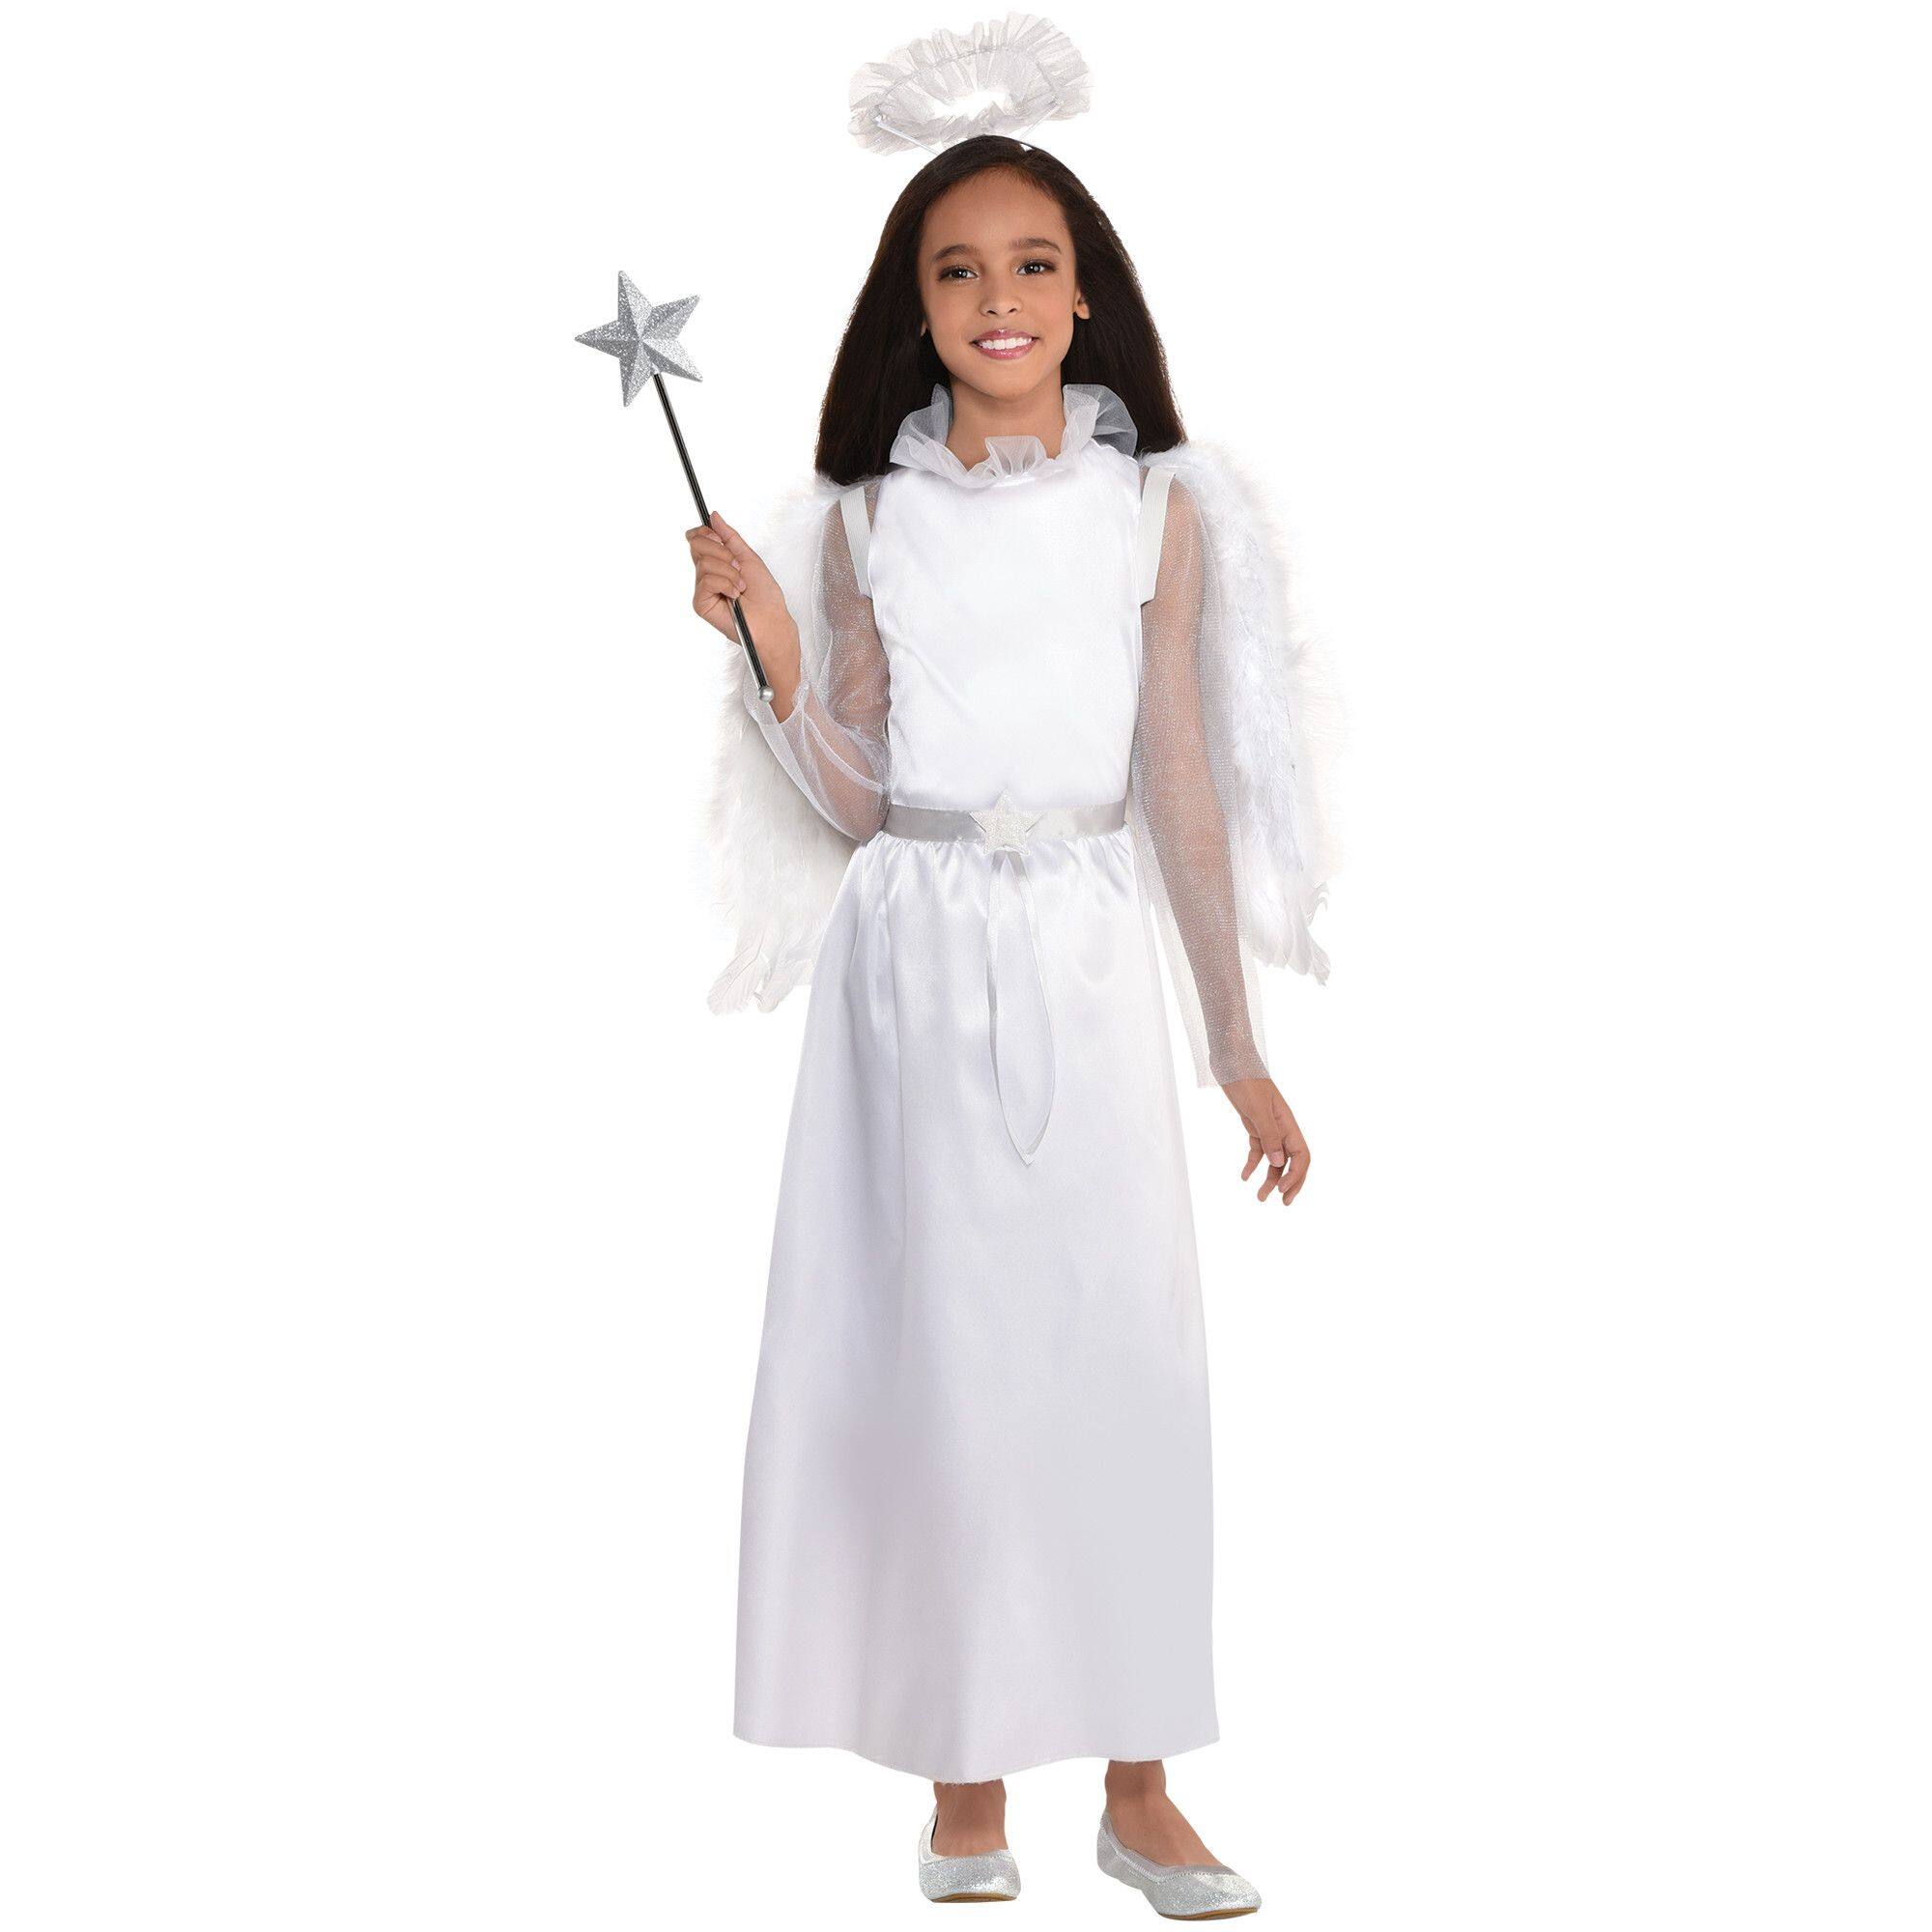 Buy Forum Novelties Angel Costume Kit , White Online at Low Prices in India  - Amazon.in